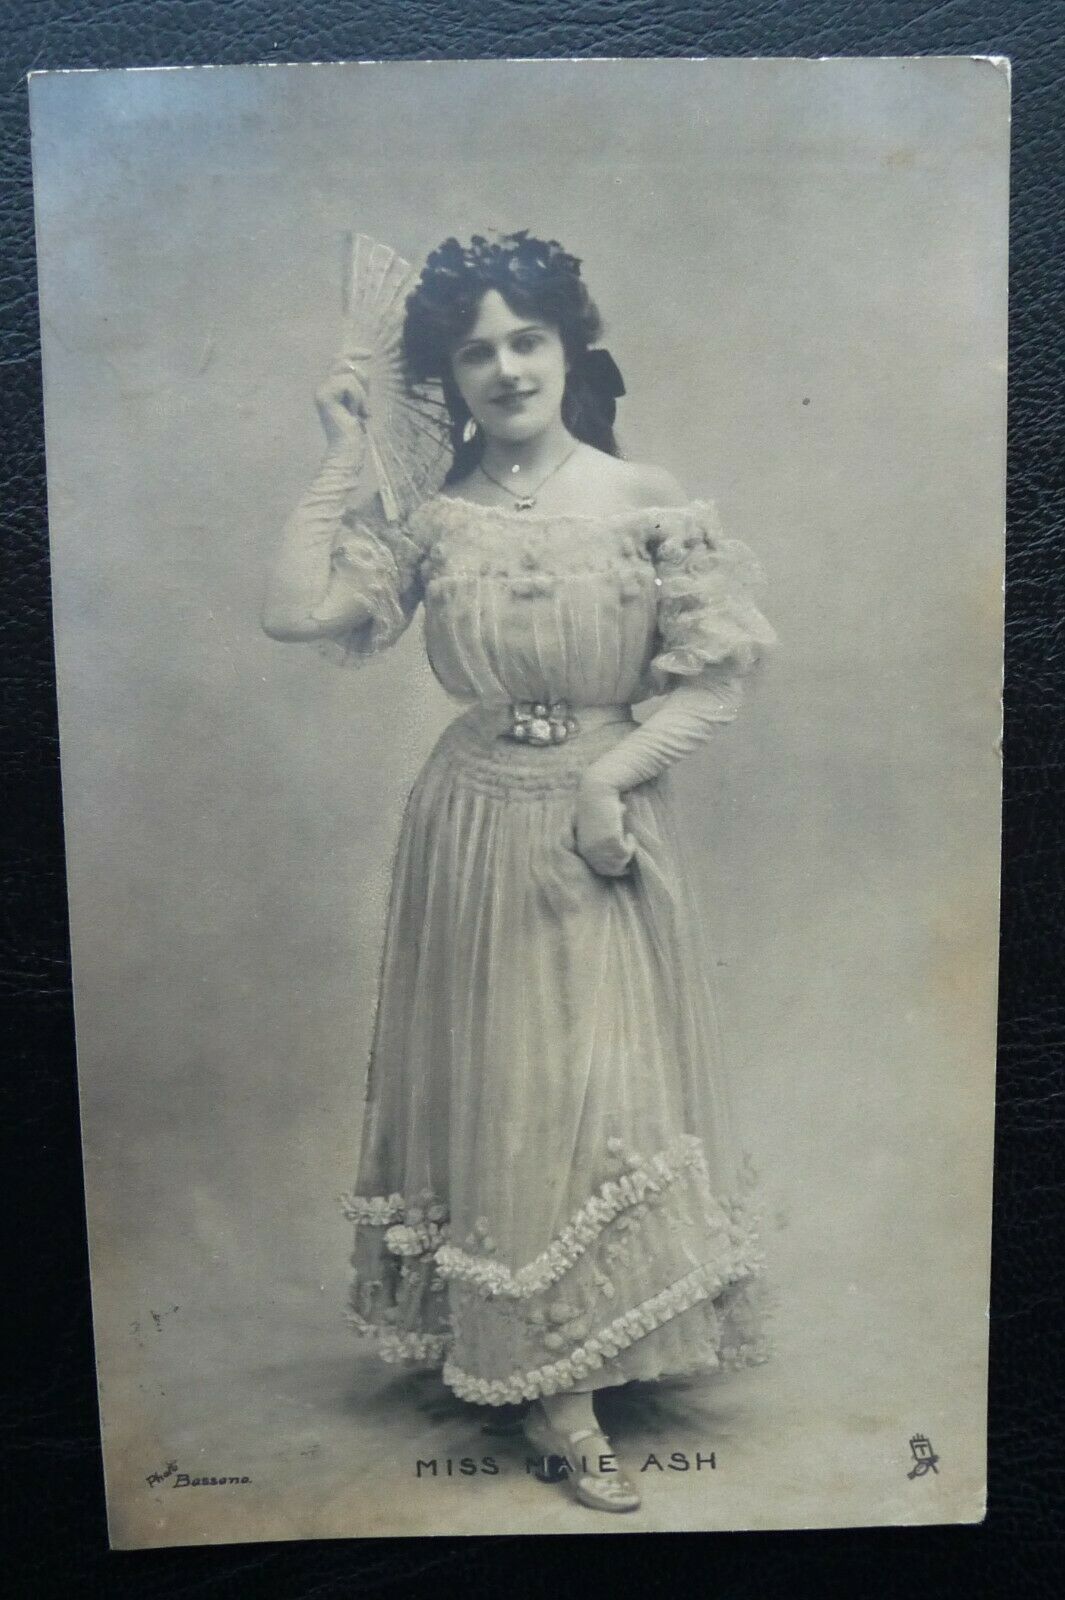 House Clearance - EDWARDIAN ACTRESS MISS MAIE ASH POSTCARD POSTED MIDDLESBROUGH 1909